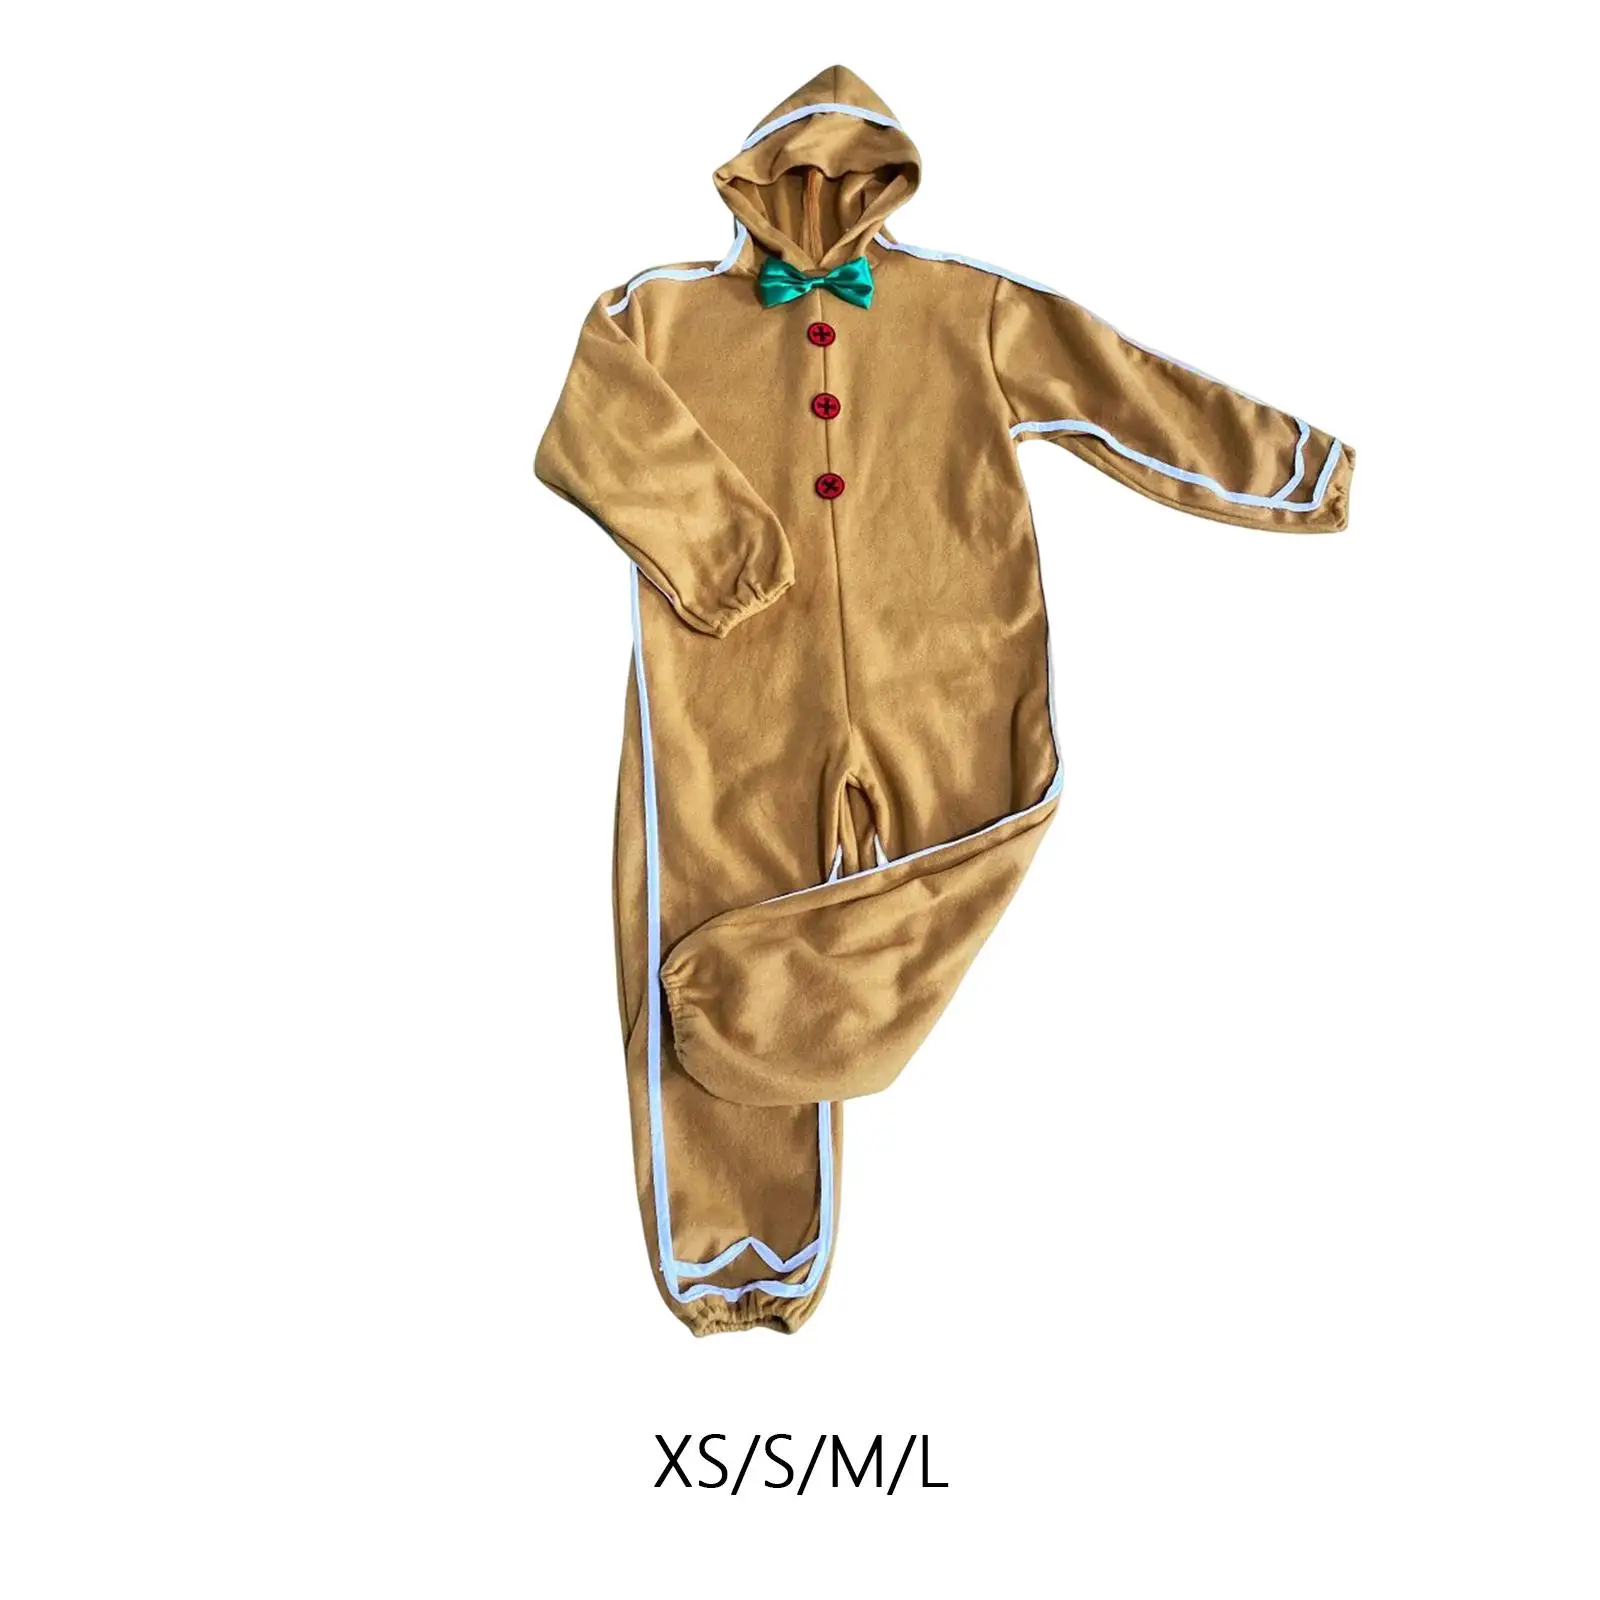 Christmas Outfit Boys Girls Fancy Dress Child Gingerbread Man Costume Clothes Jumpsuit for Cosplay Photo Props Role Play Party